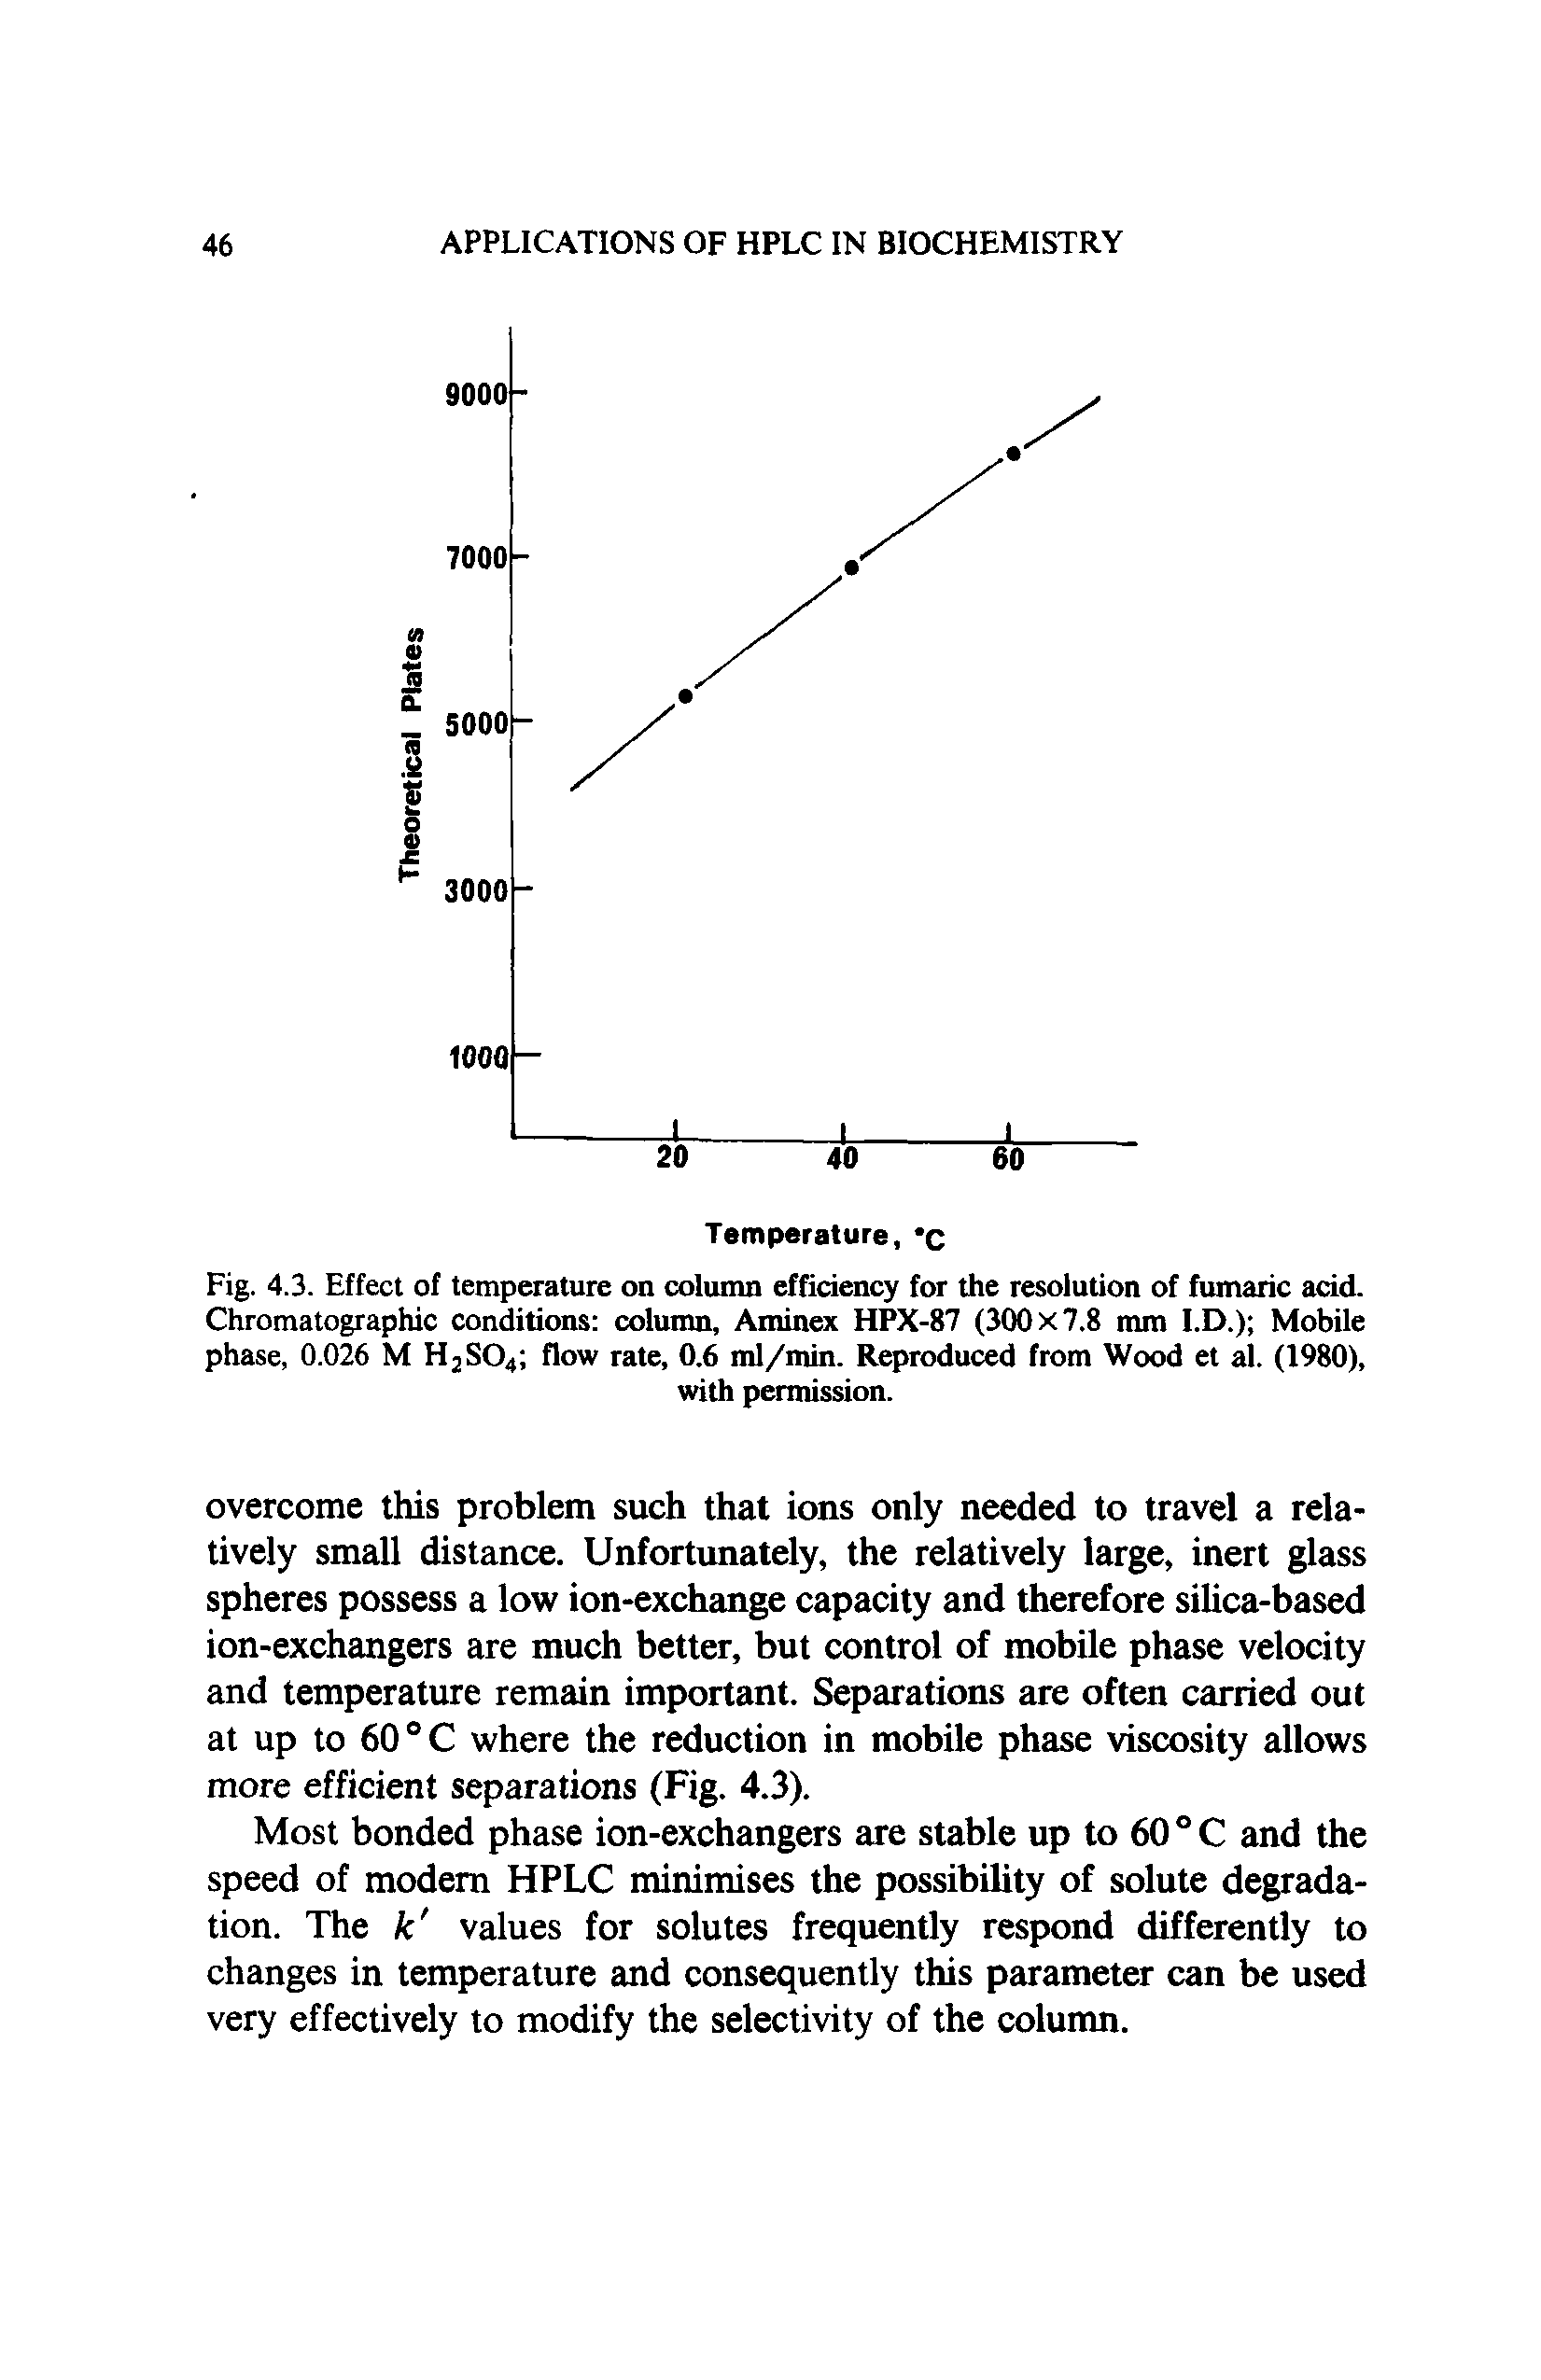 Fig. 4.3. Effect of temperature on column efficiency for the resolution of fumaric acid. Chromatographic conditions column, Aminex HPX-87 (300x7.8 mm I.D.) Mobile phase, 0.026 M H2SO4 flow rate, 0.6 ml/min. Reproduced from Wood et al. (1980),...